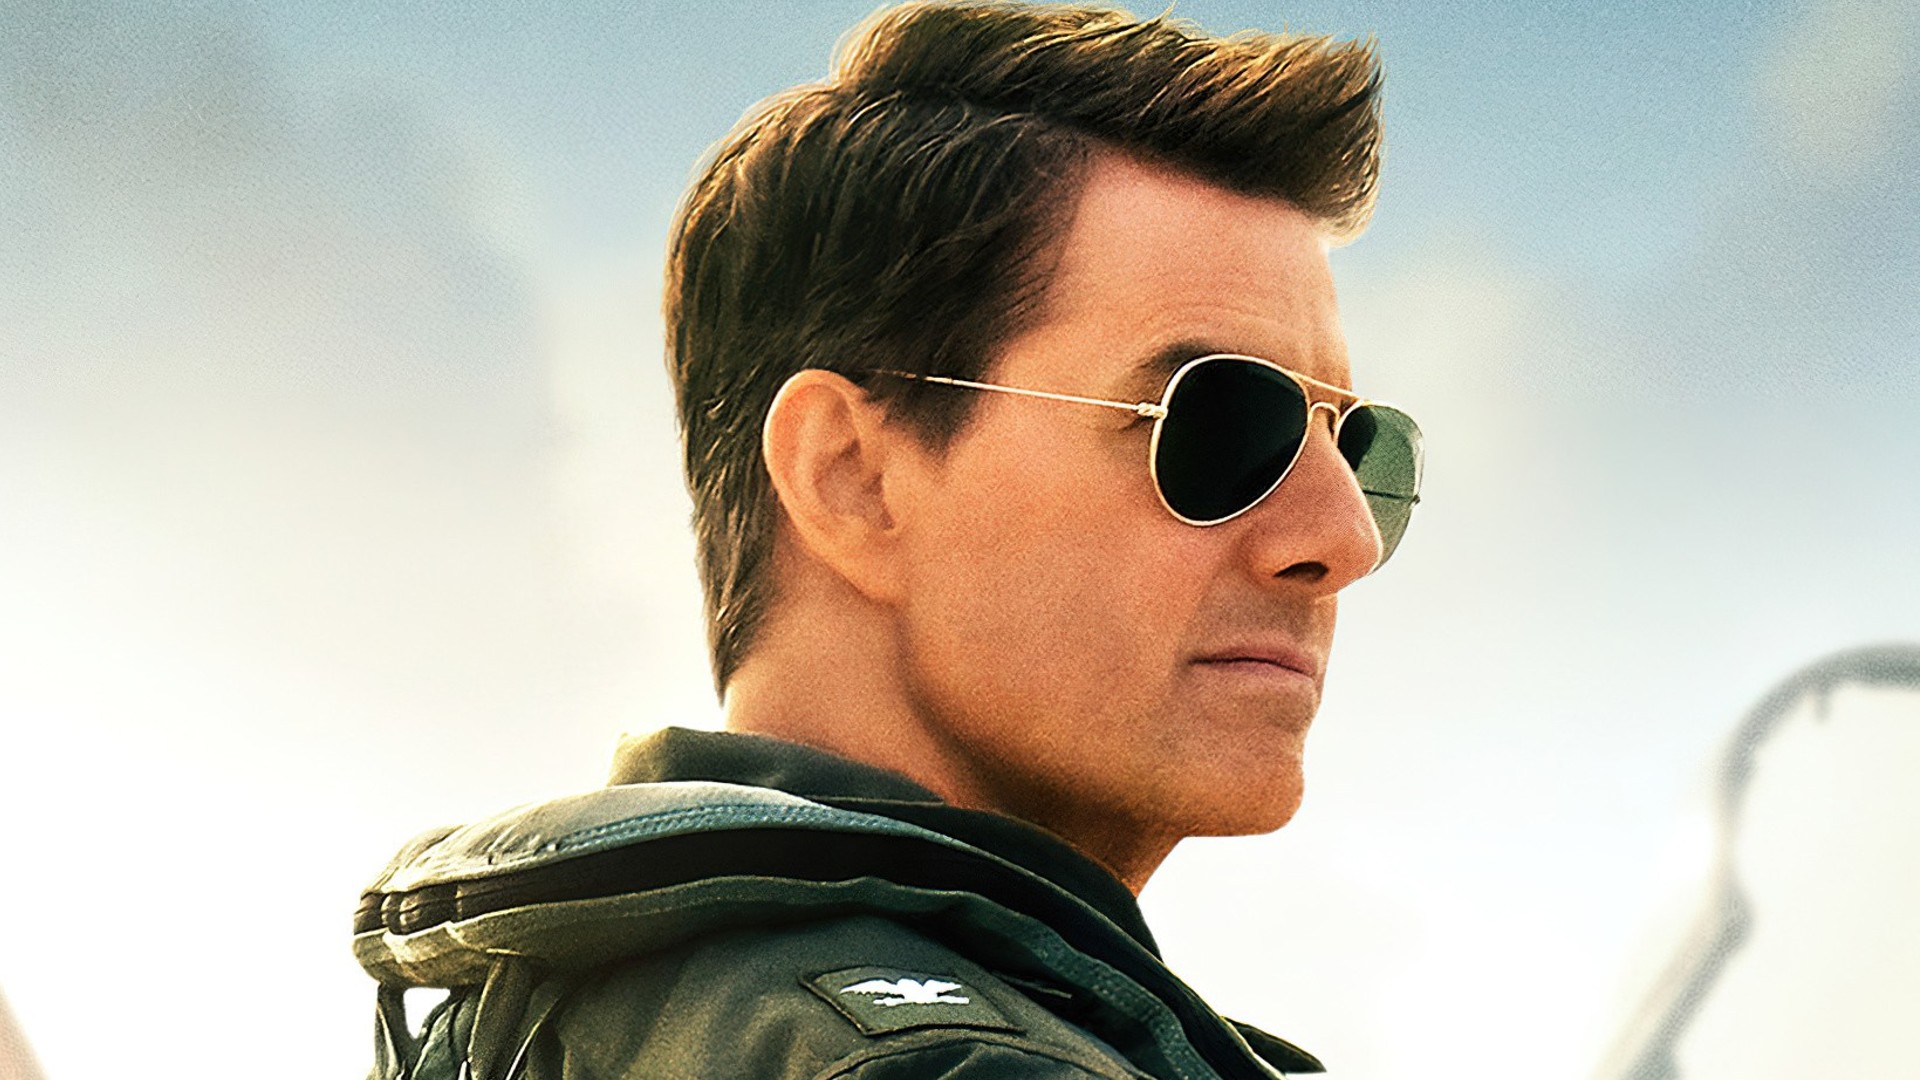 You Are Not Ready For Money Tom Cruise Makes per Word of Dialogue in His Films